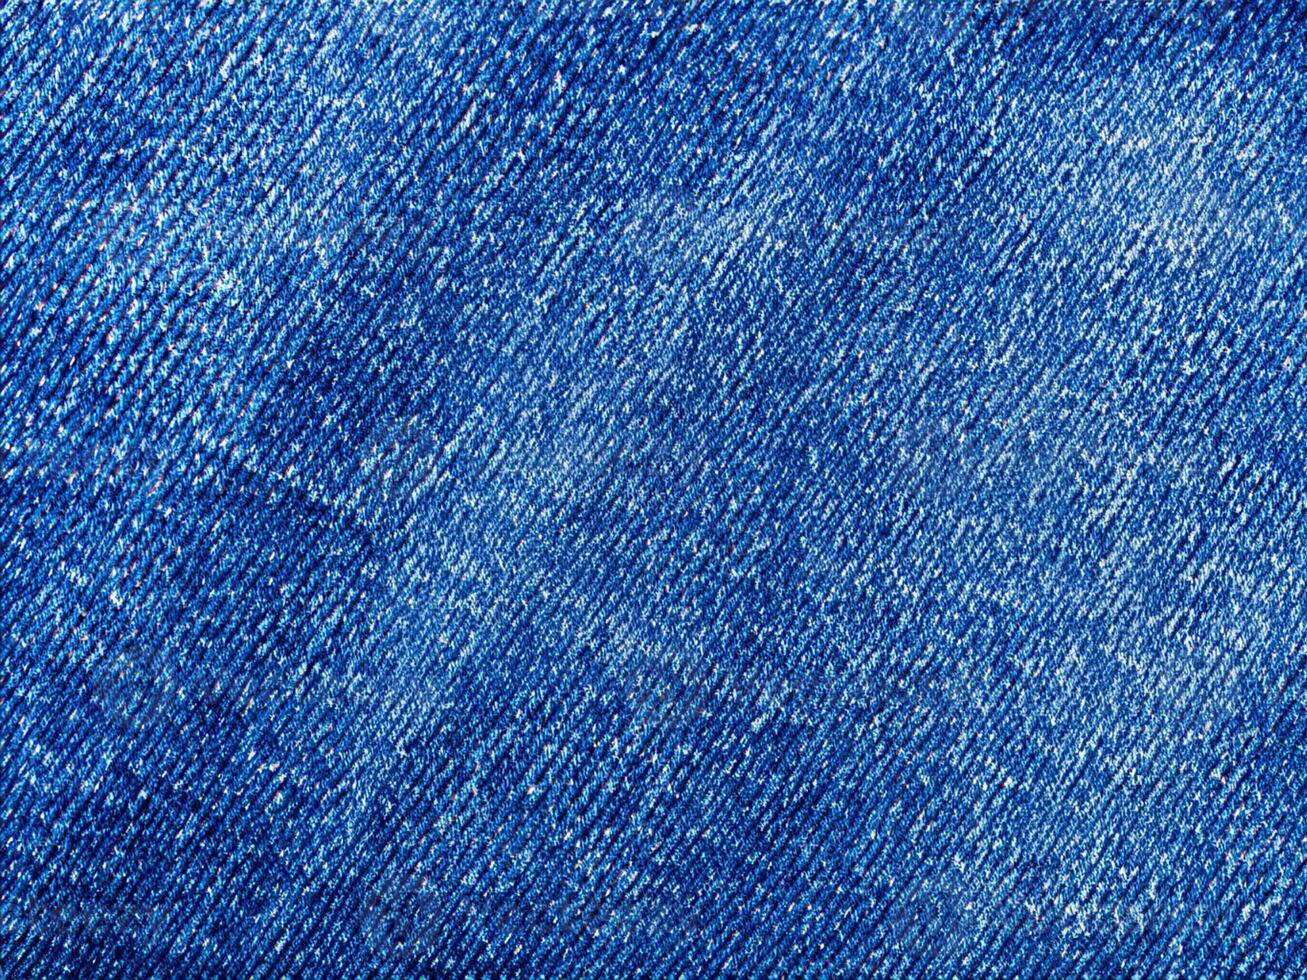 jeans background. close up of a blue jeans background photo